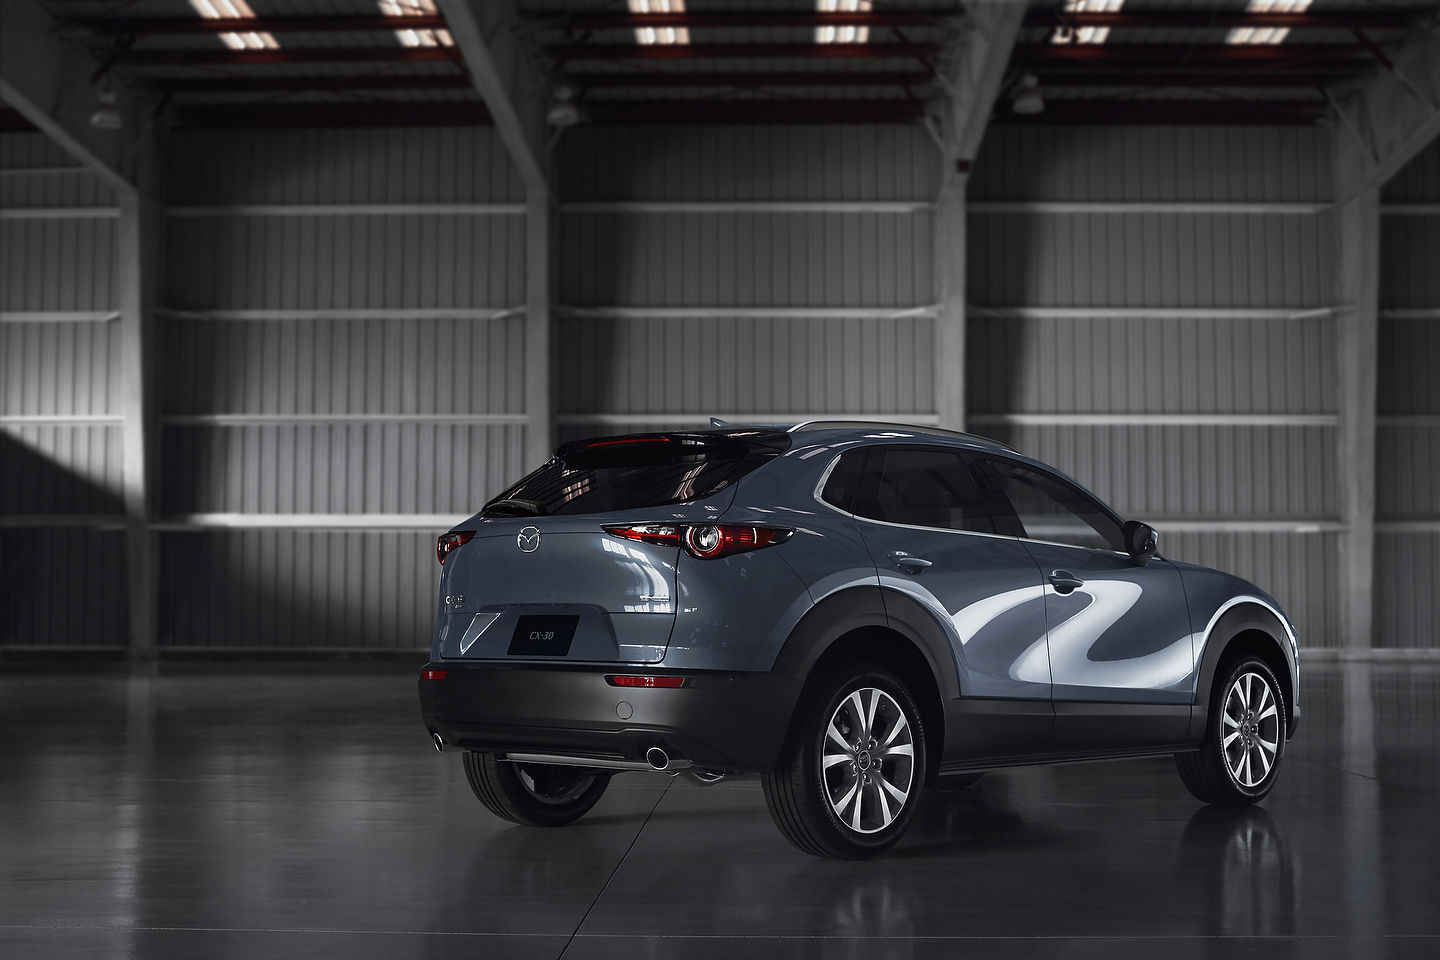 2021 Mazda CX-30 vs. 2021 Toyota C-HR: The CX-30 Adds More to The Table